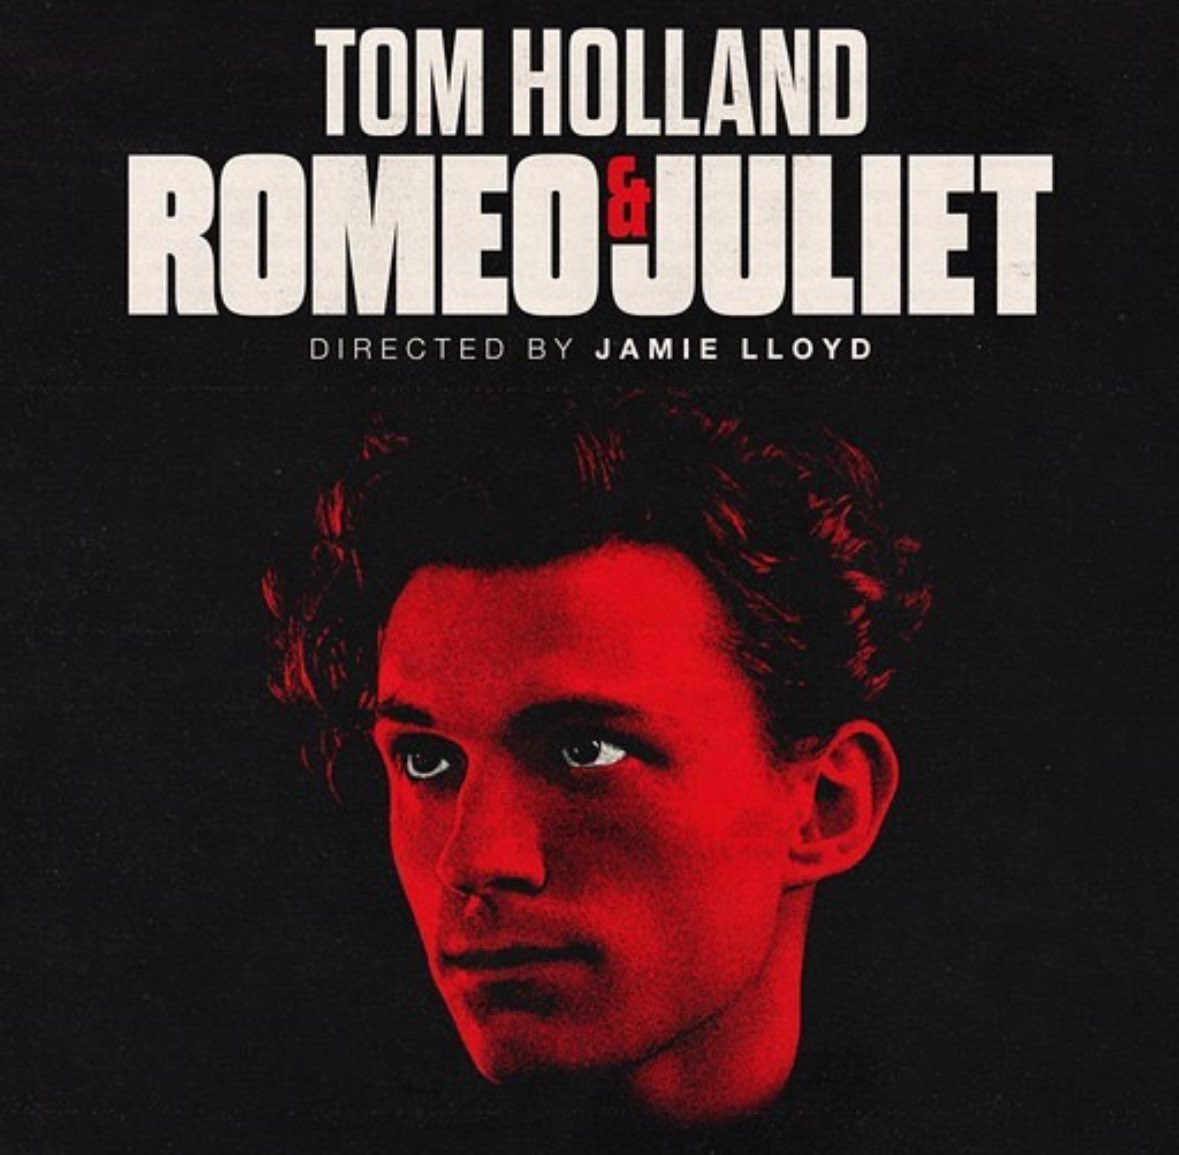 Francesca Amewudah-Rivers to star as Juliet opposite Tom Holland as Romeo in Jamie Lloyd’s West End stage adaptation of ‘ROMEO & JULIET.’